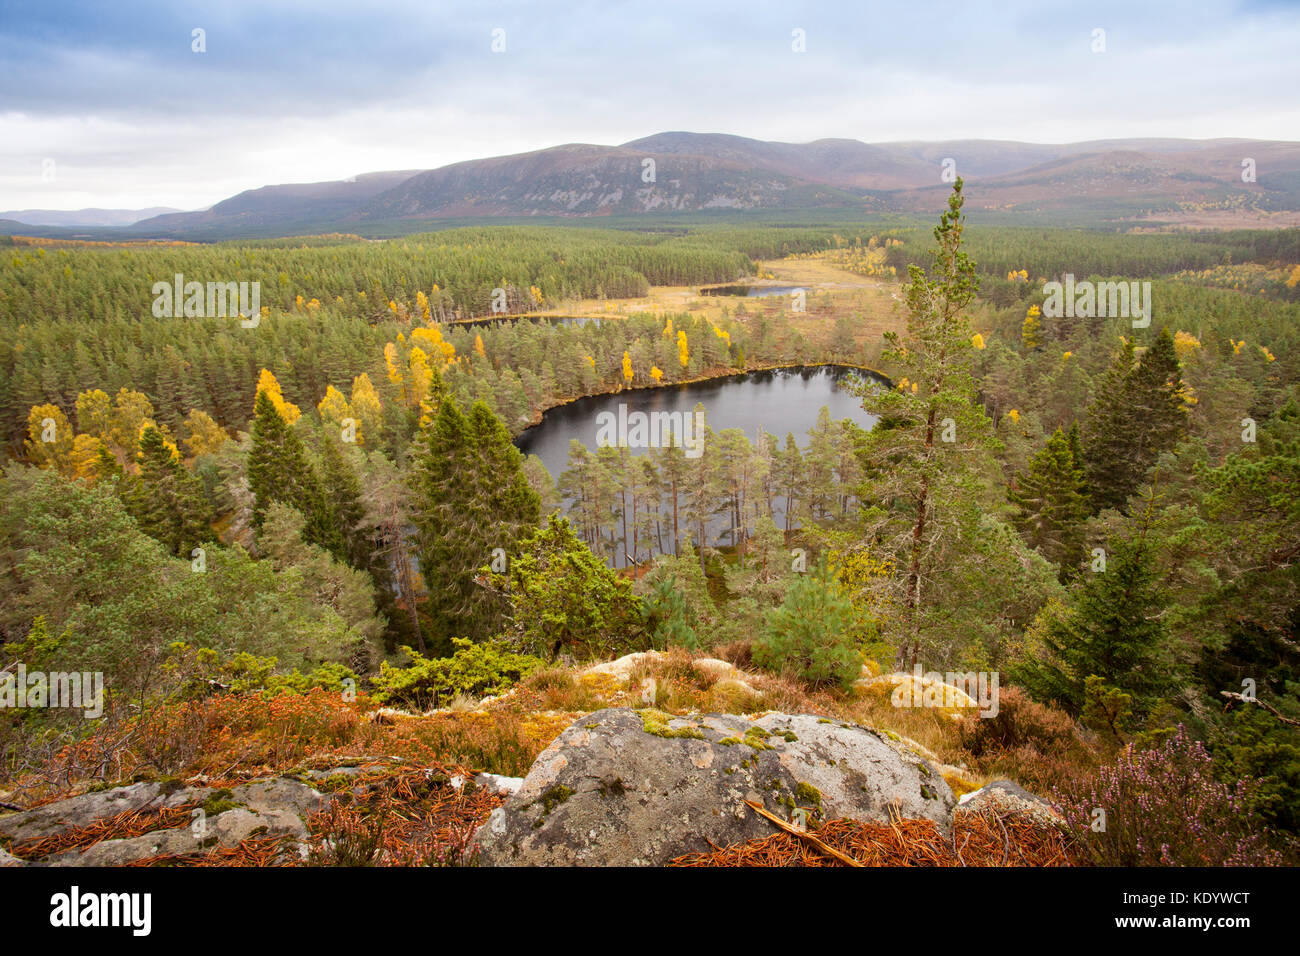 View from Farleitter Crag over the beautiful Cairngorm Landscape and Uath Lochan or Uath Lochans with Glen Feshie in the middle distance, Scotland Stock Photo